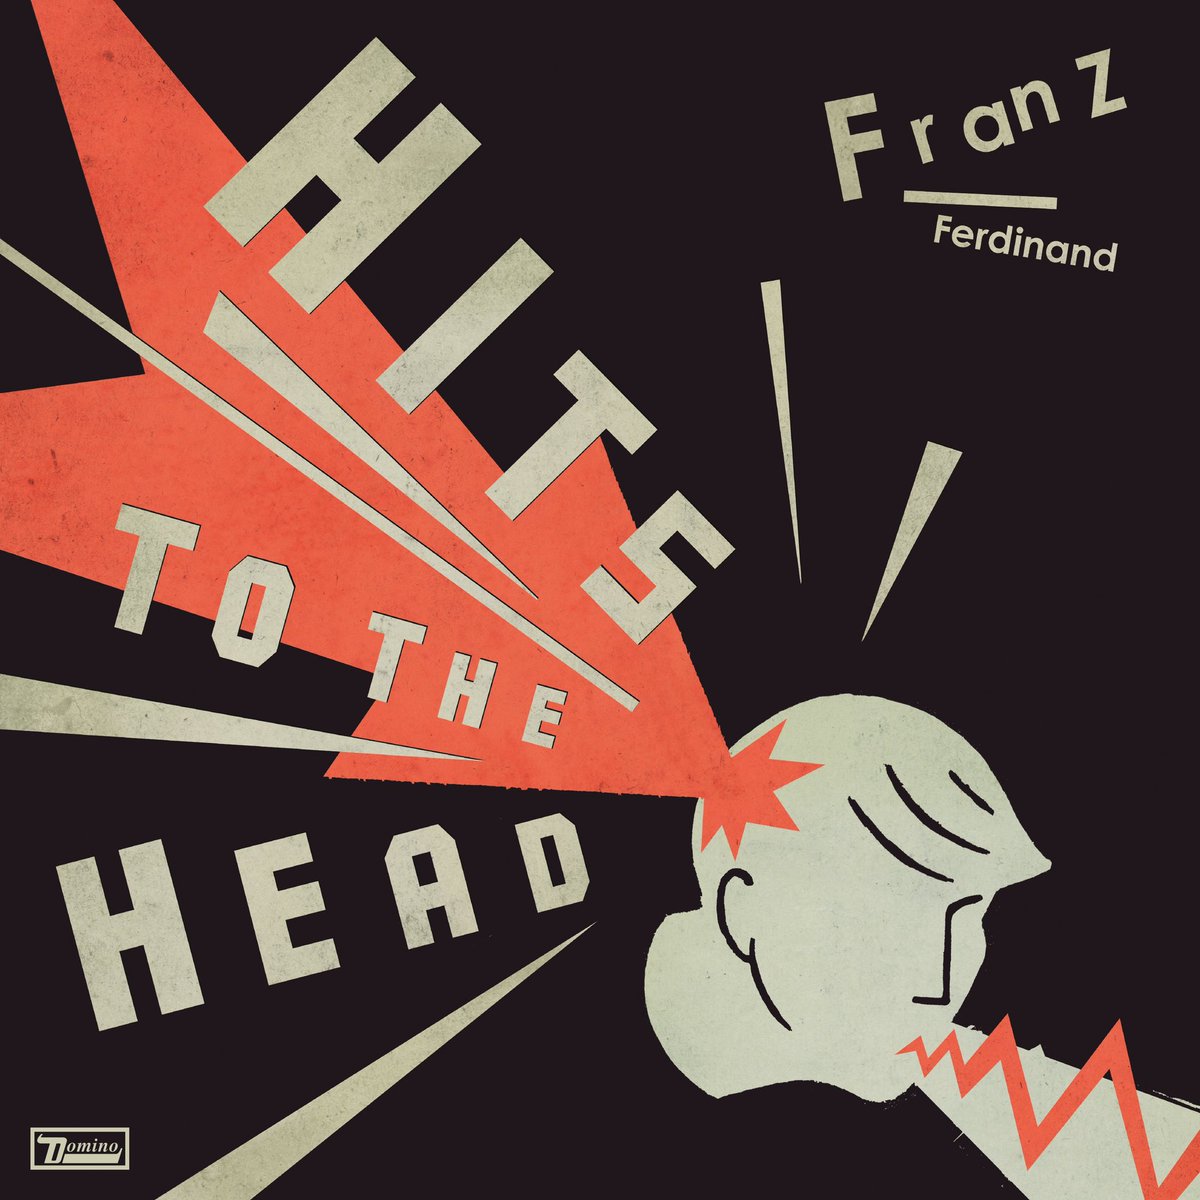 💥 @Franz_Ferdinand announce ‘Hits To The Head’, coming March 11 💥 ‘Hits To The Head’ is the band’s first greatest hits collection, spanning 20 years of their career to date + includes new song out today, “Billy Goodbye”.